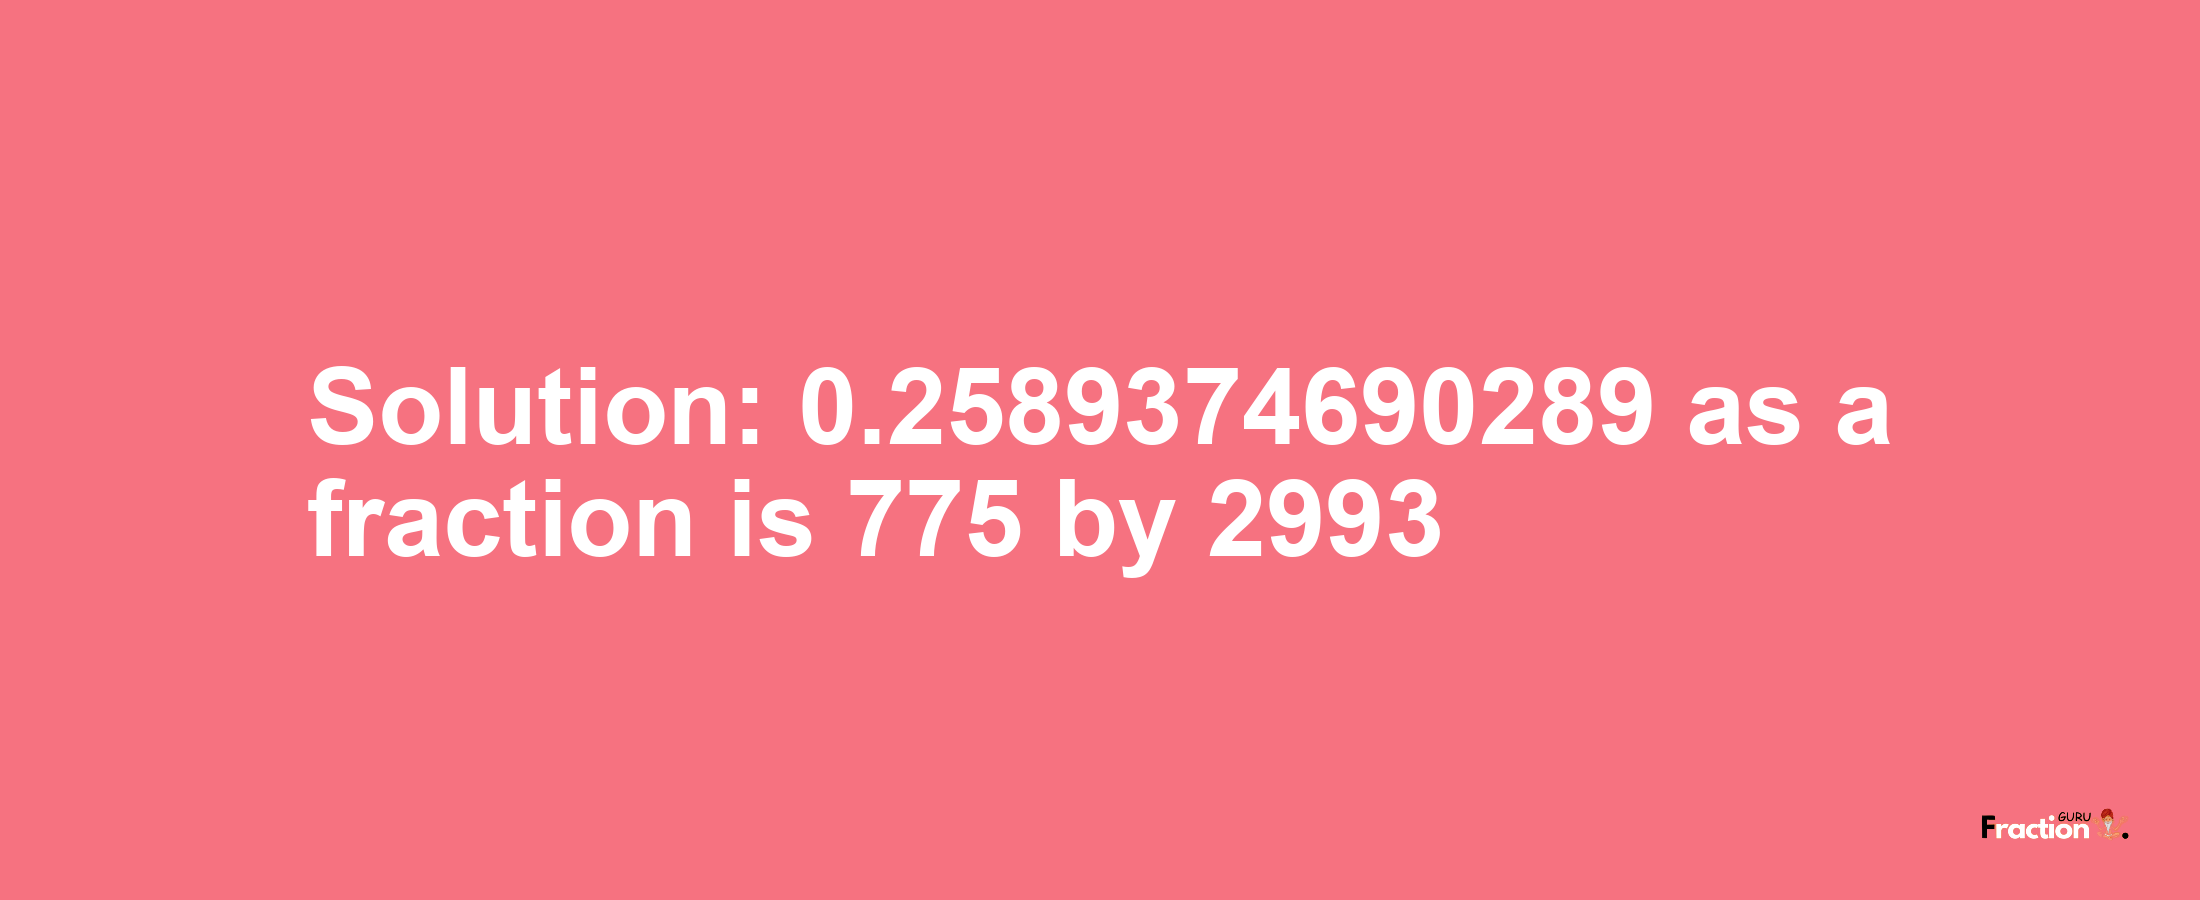 Solution:0.2589374690289 as a fraction is 775/2993